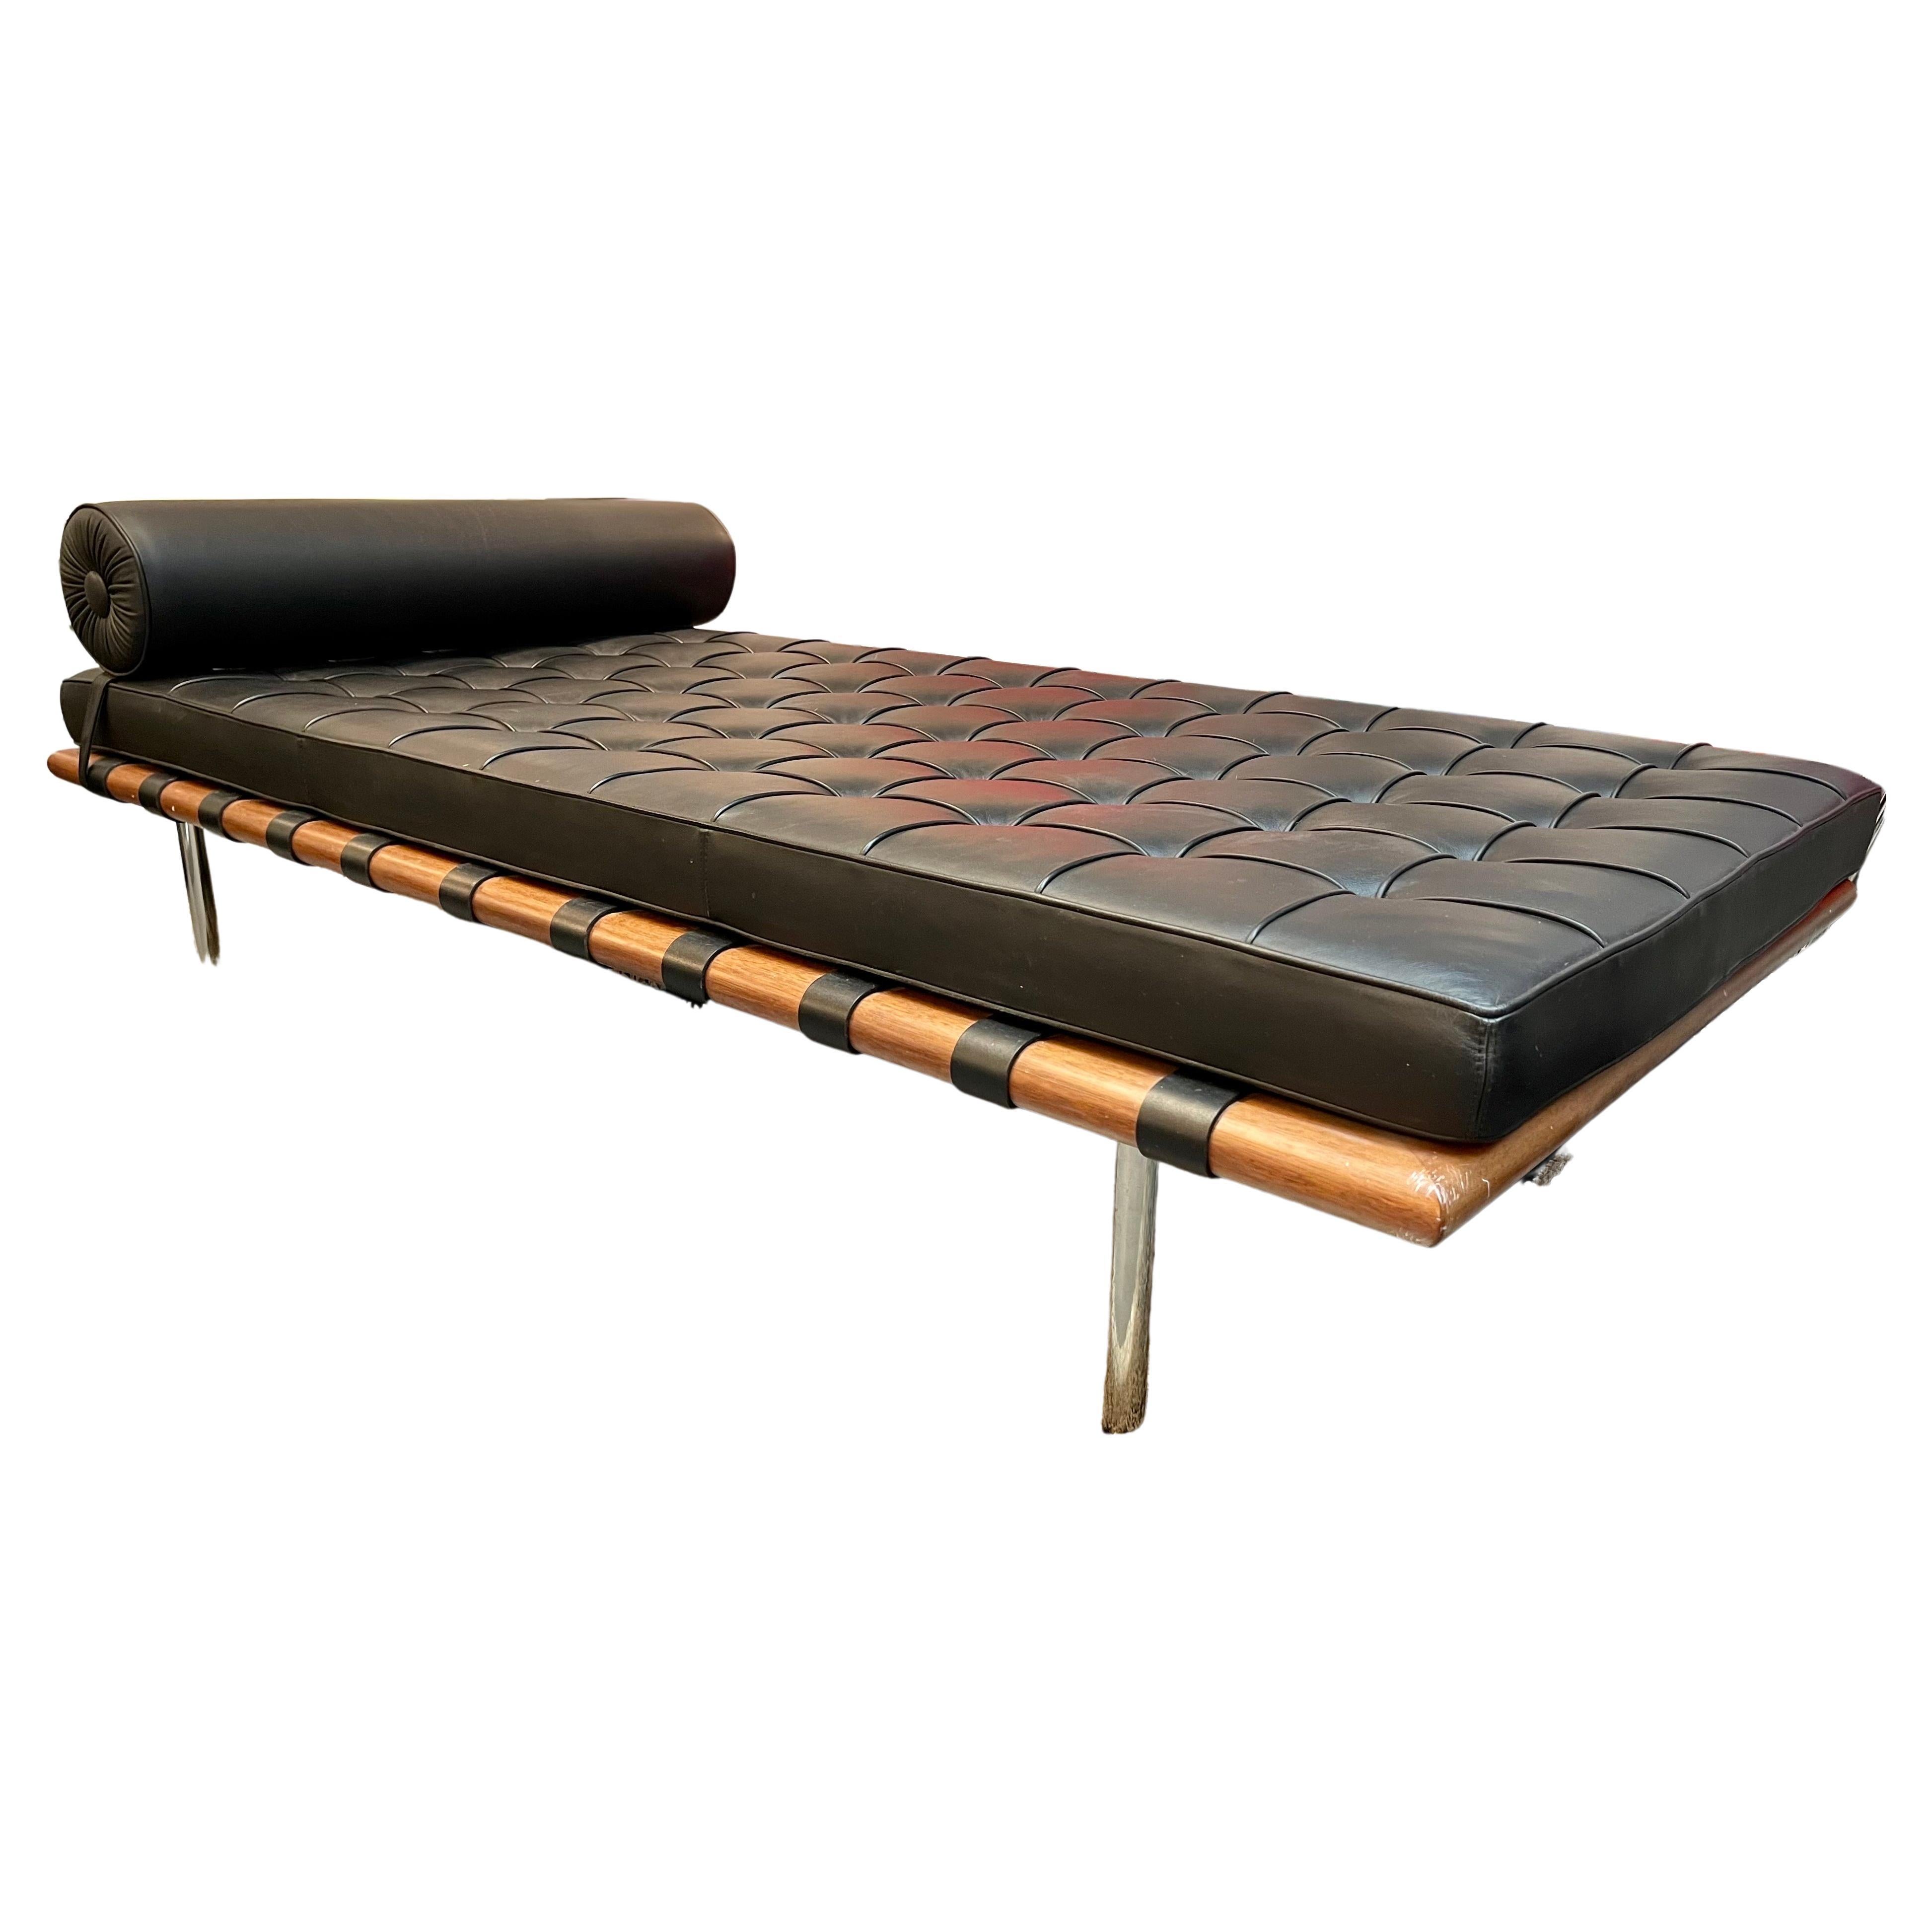 Barcelona Daybed by Ludwig Mies van der Rohe for Knoll Signed in Black Leather